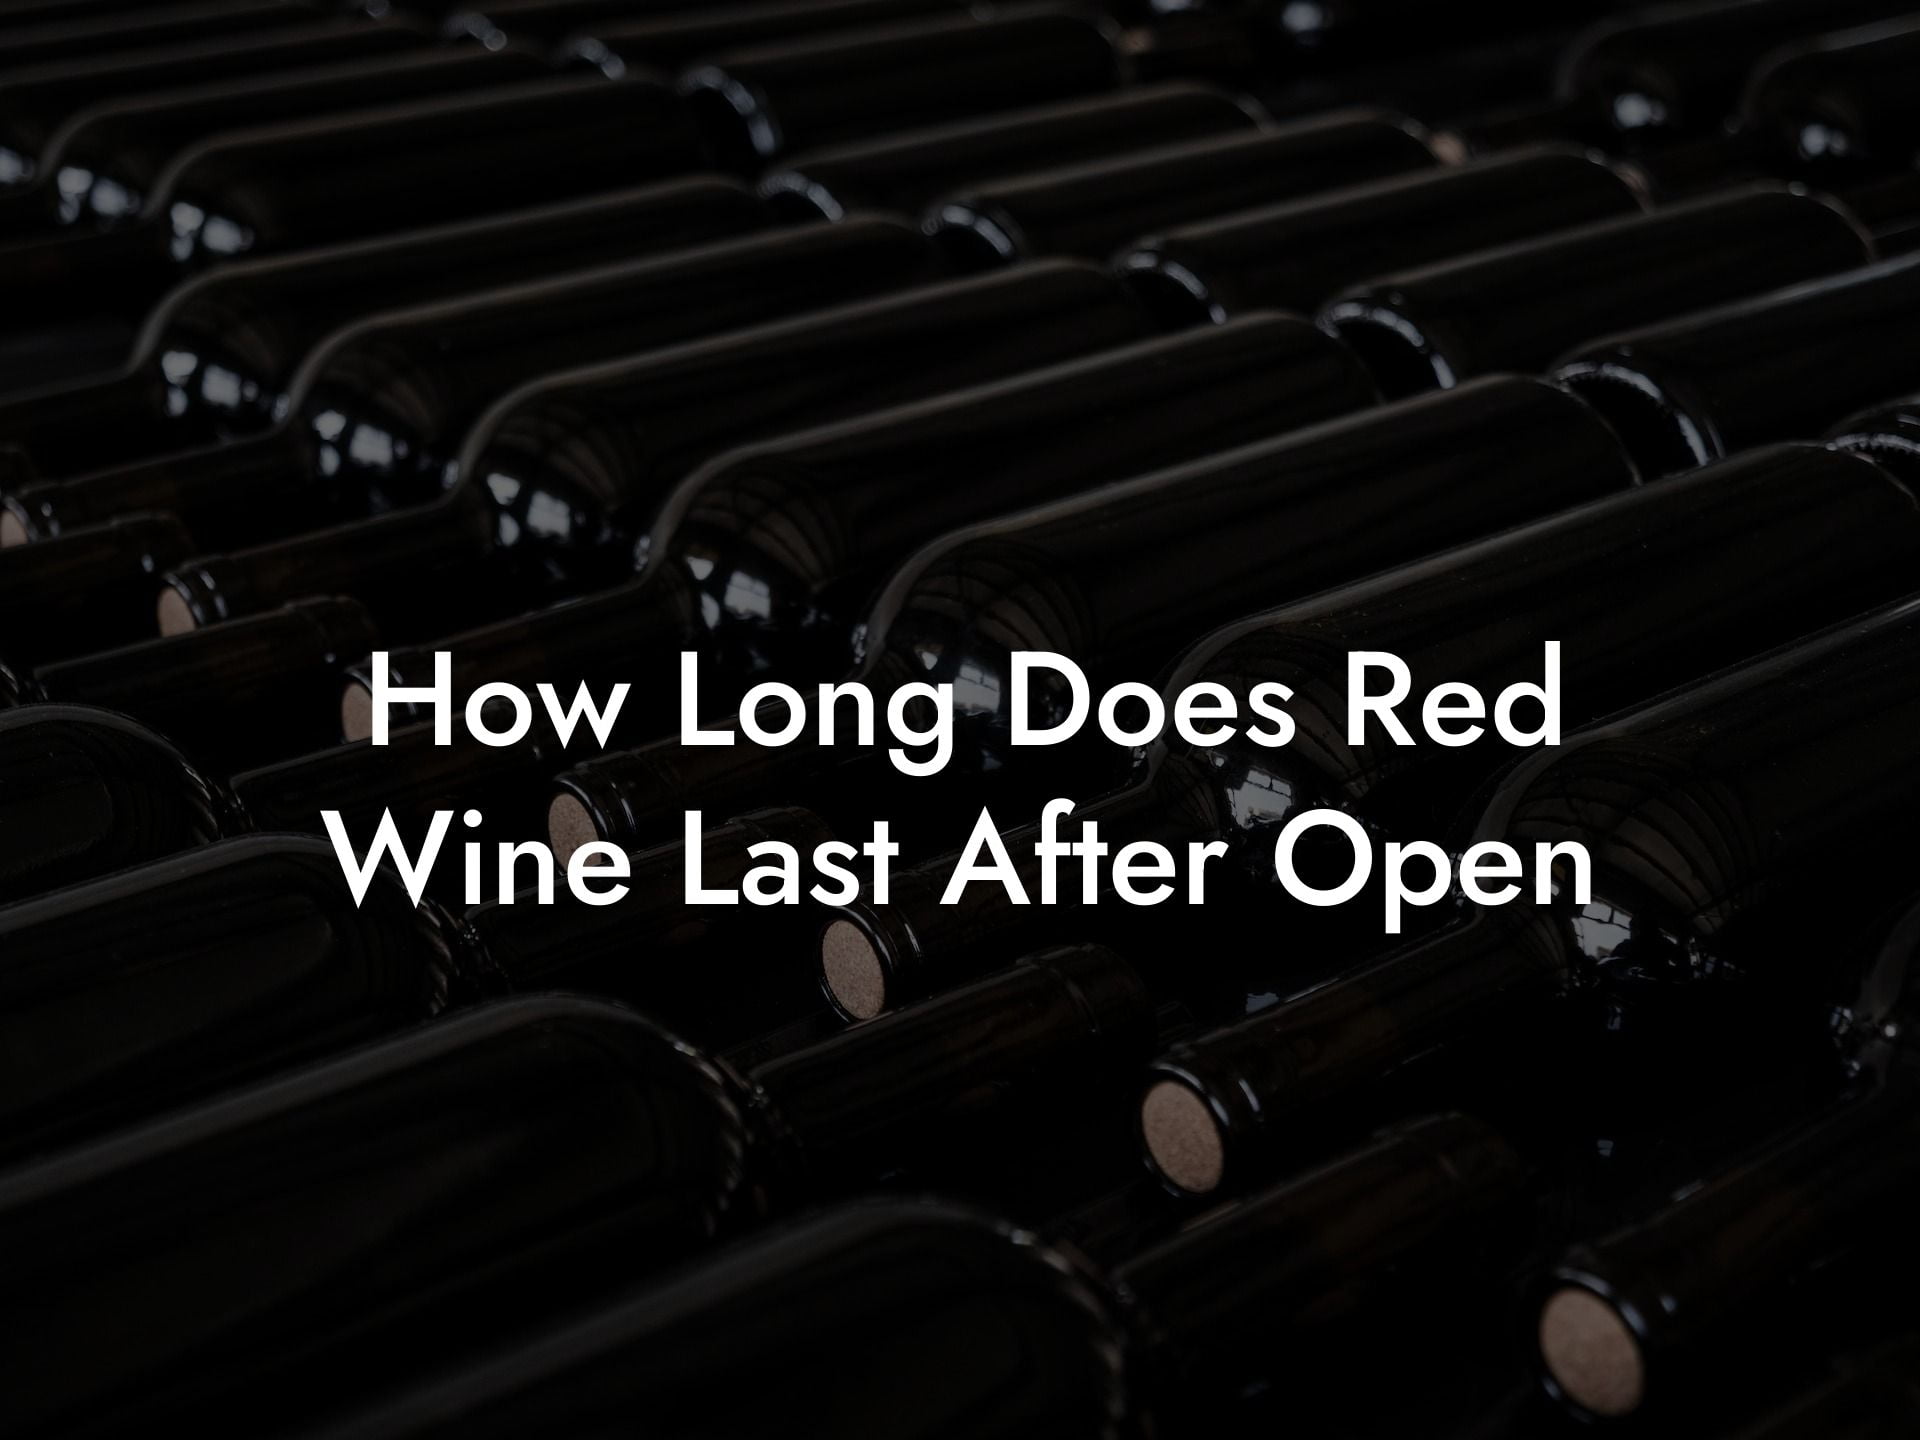 How Long Does Red Wine Last After Open